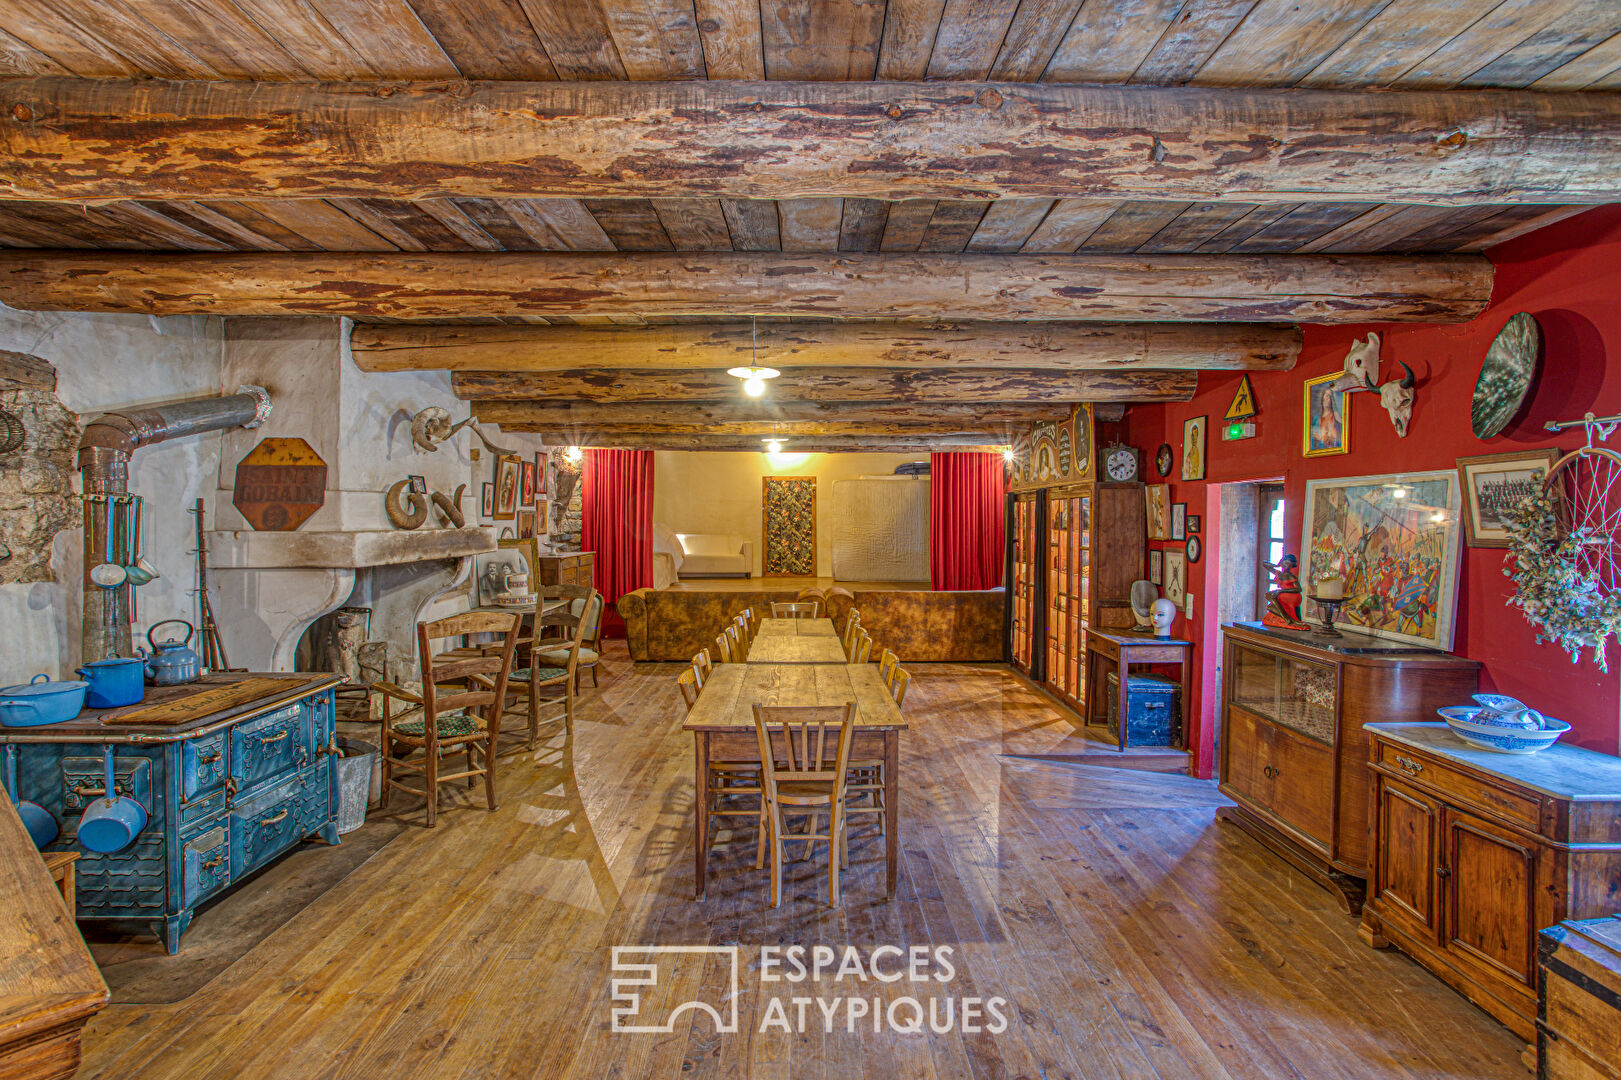 Atypical farmhouse completely renovated